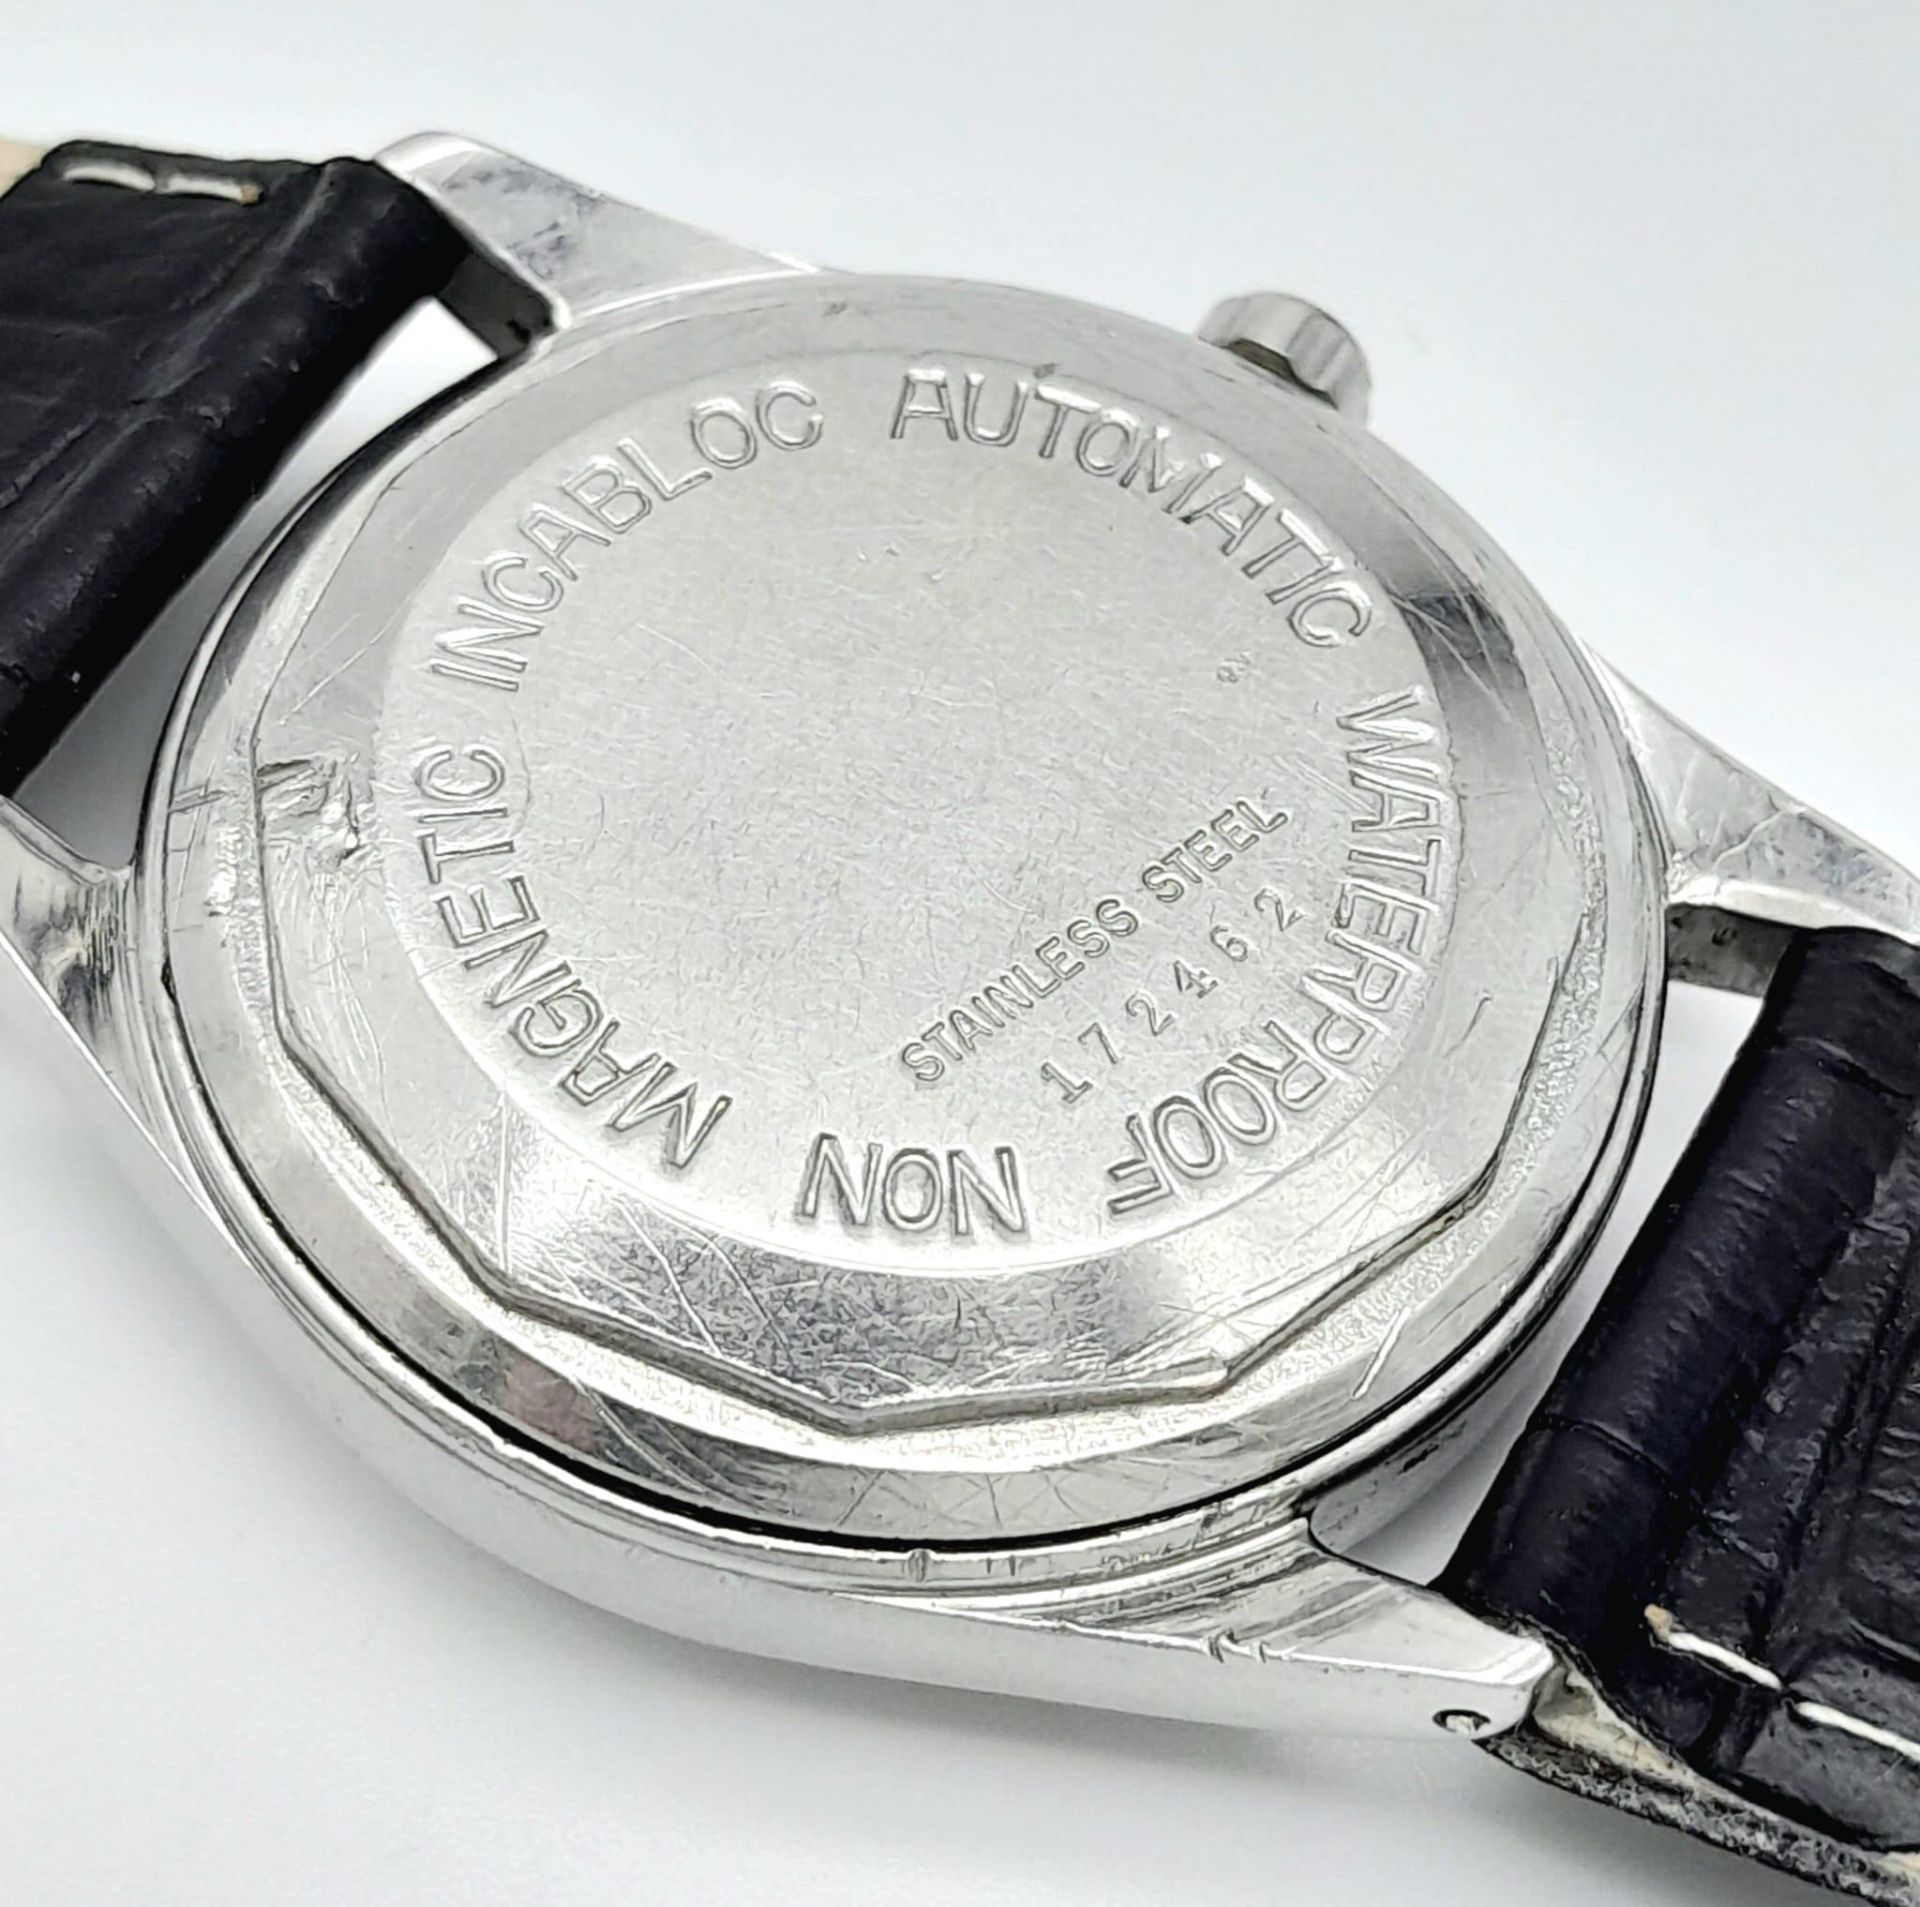 A Vintage Genicko Gents Mechanical Watch. Black leather strap. Stainless steel case - 36mm. Black - Image 9 of 11